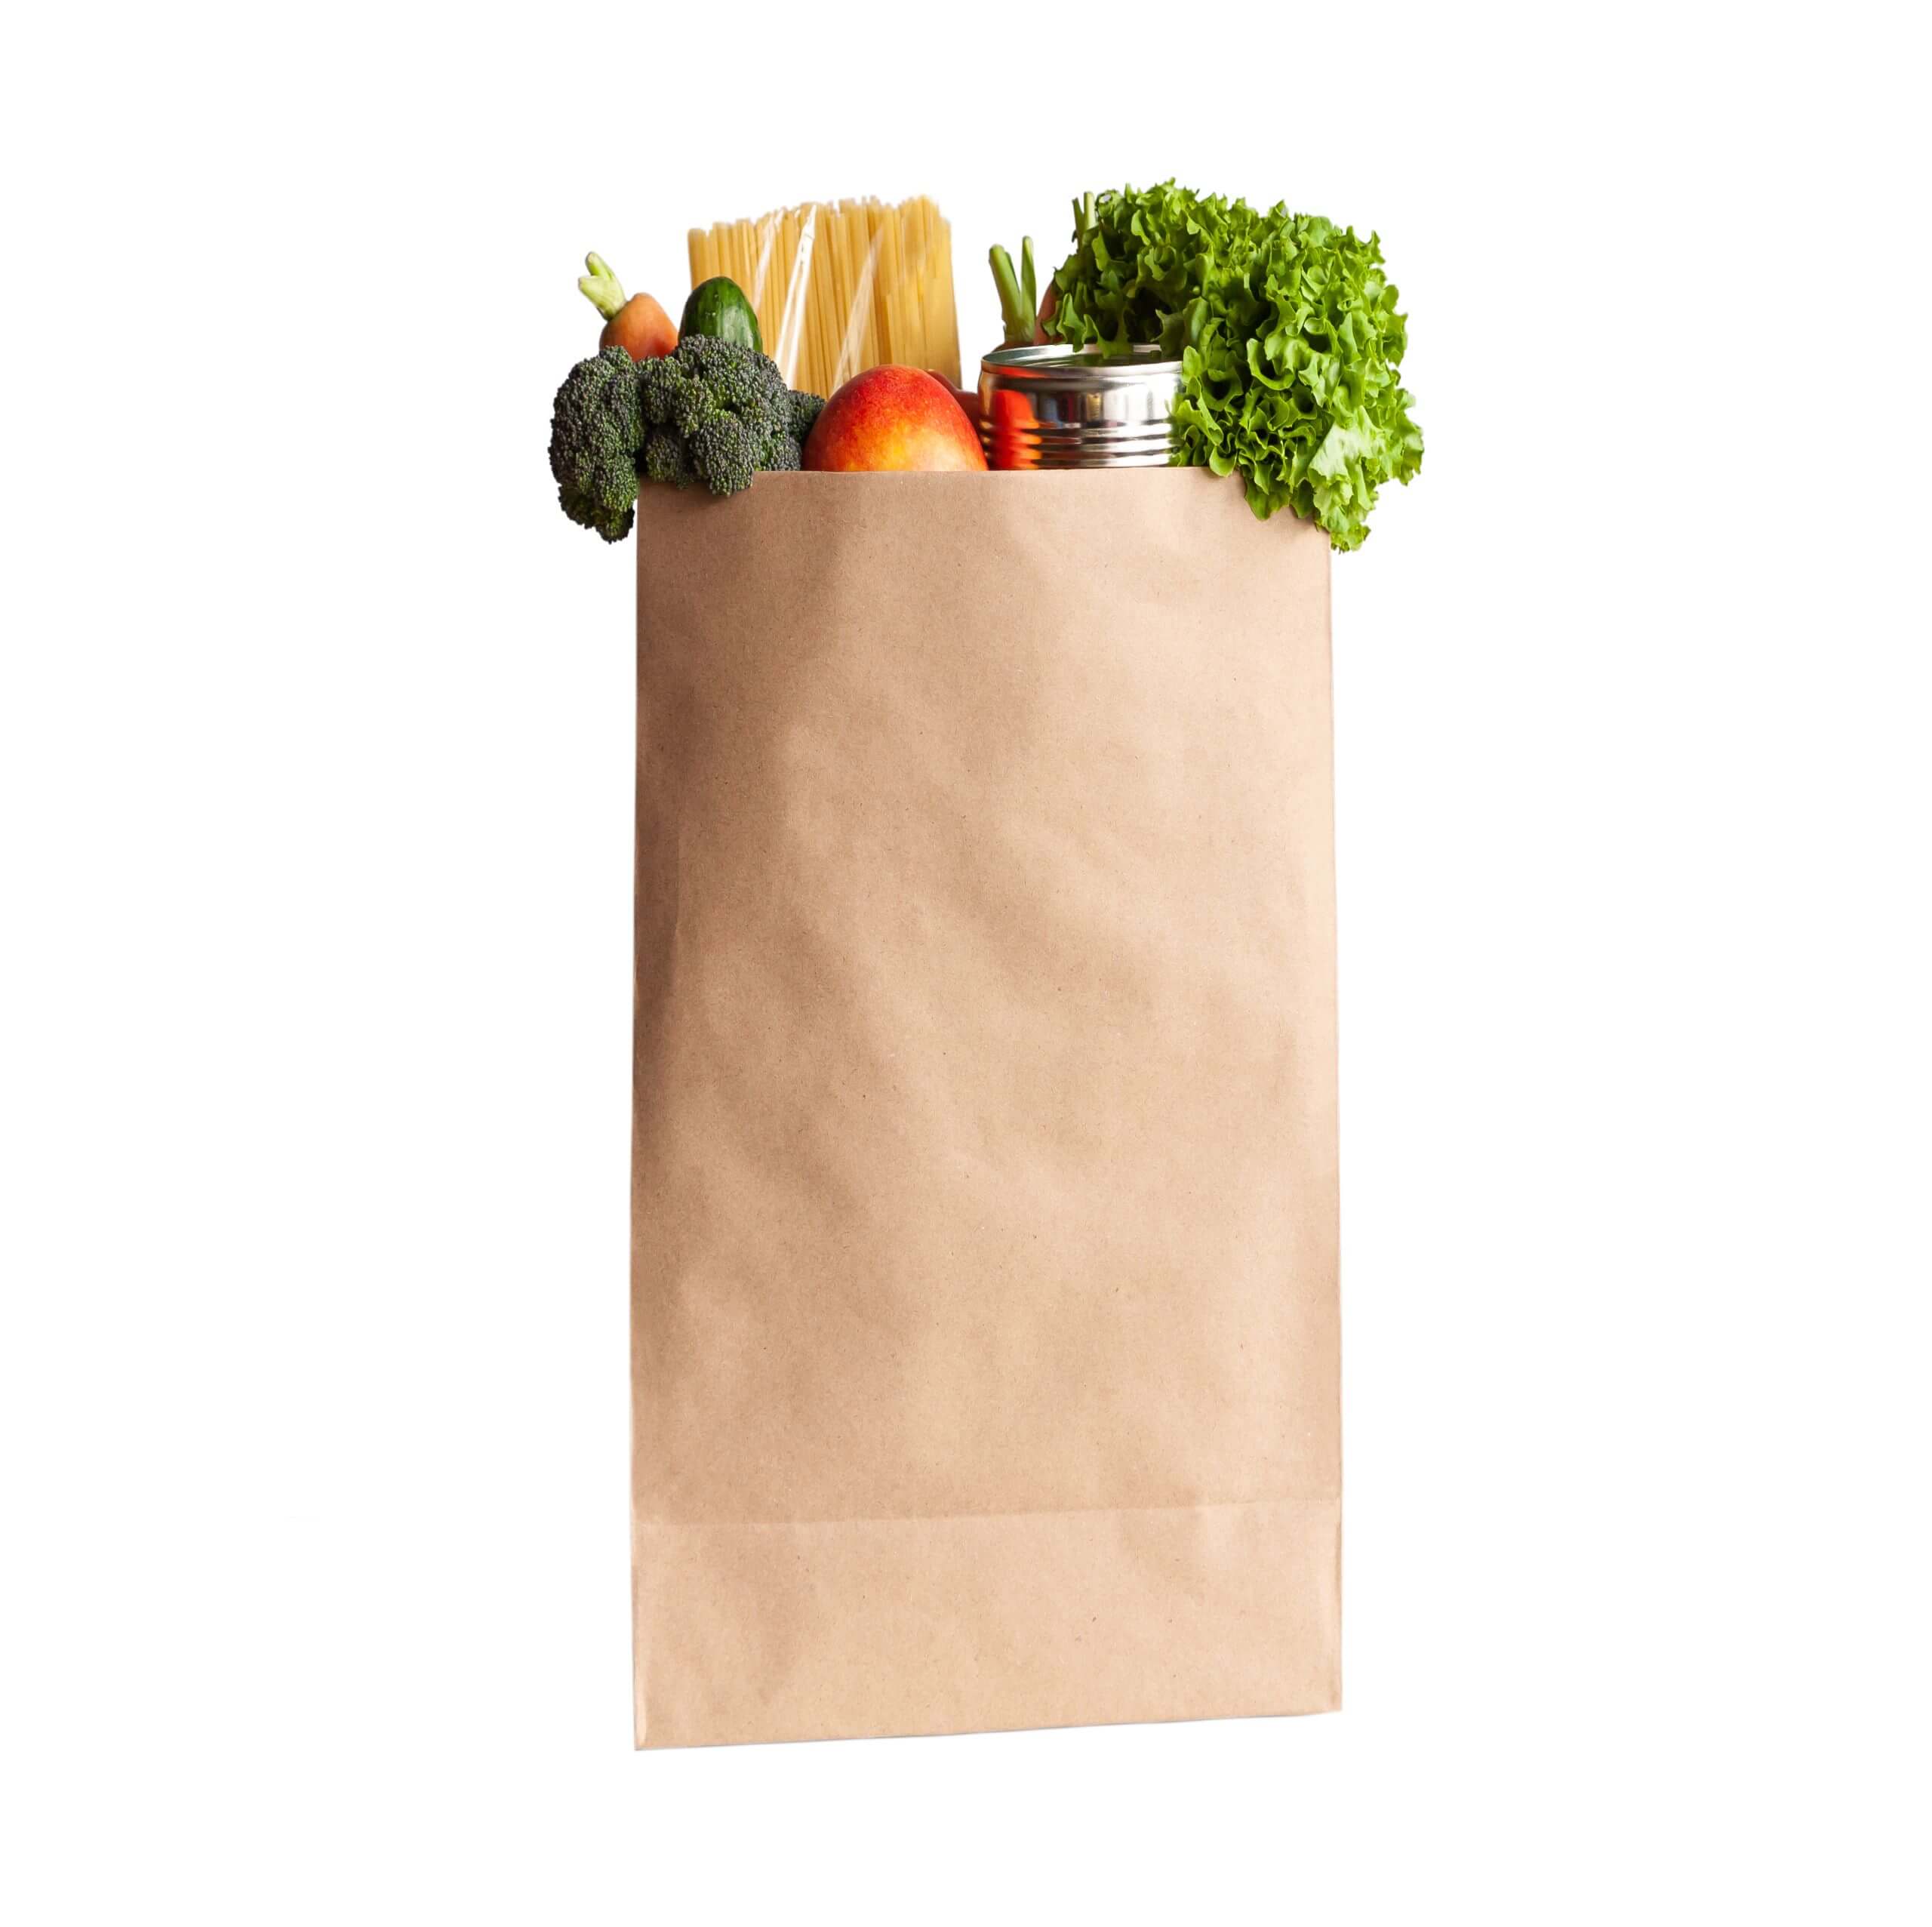 An image of a single Paper Bag with No Handles.